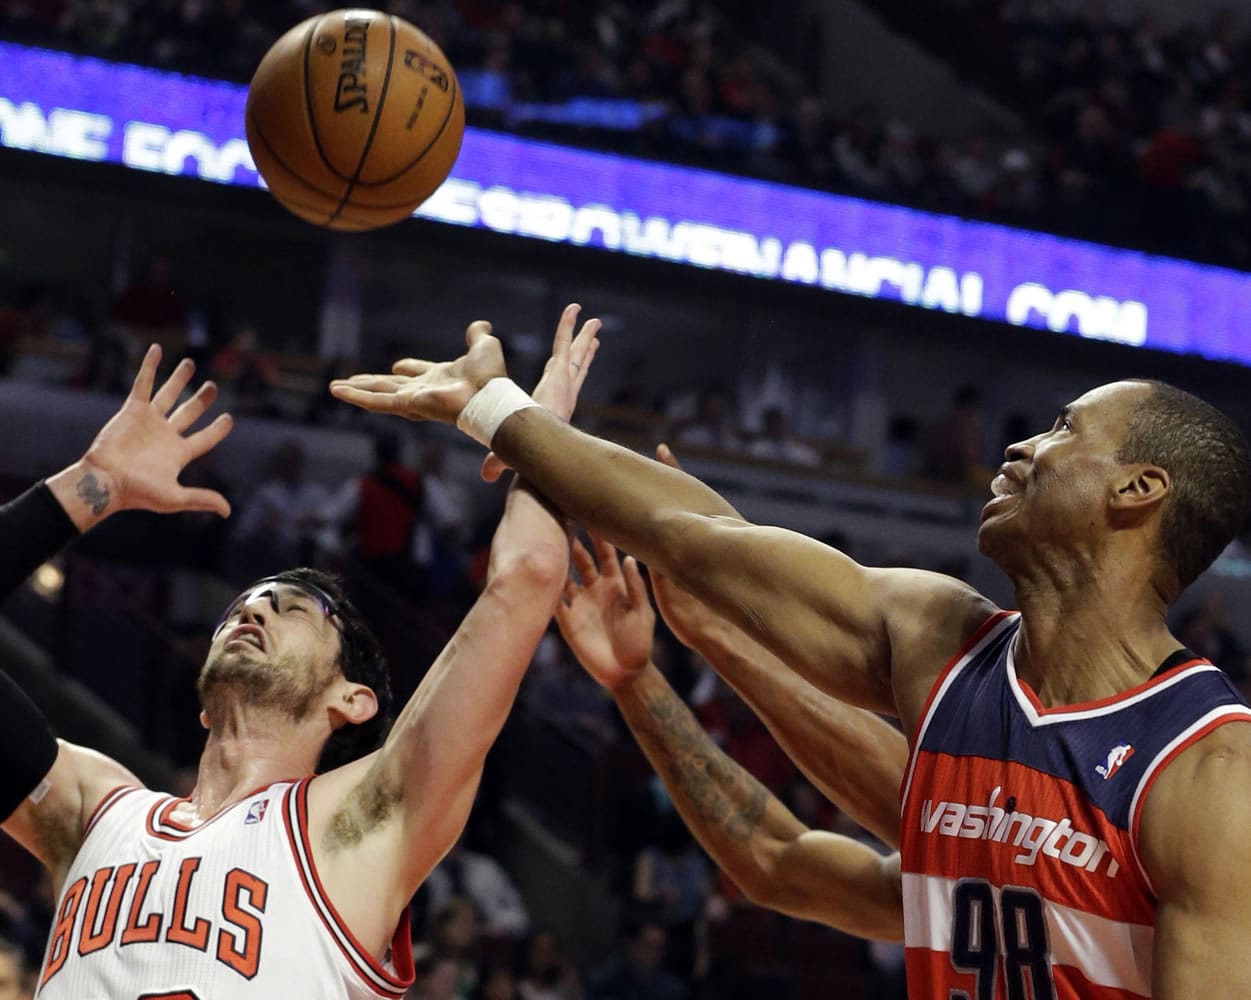 Washington Wizards center Jason Collins, right, battles for a rebound April 17 against Chicago Bulls guard Kirk Hinrich during the first half of an NBA basketball game in Chicago.